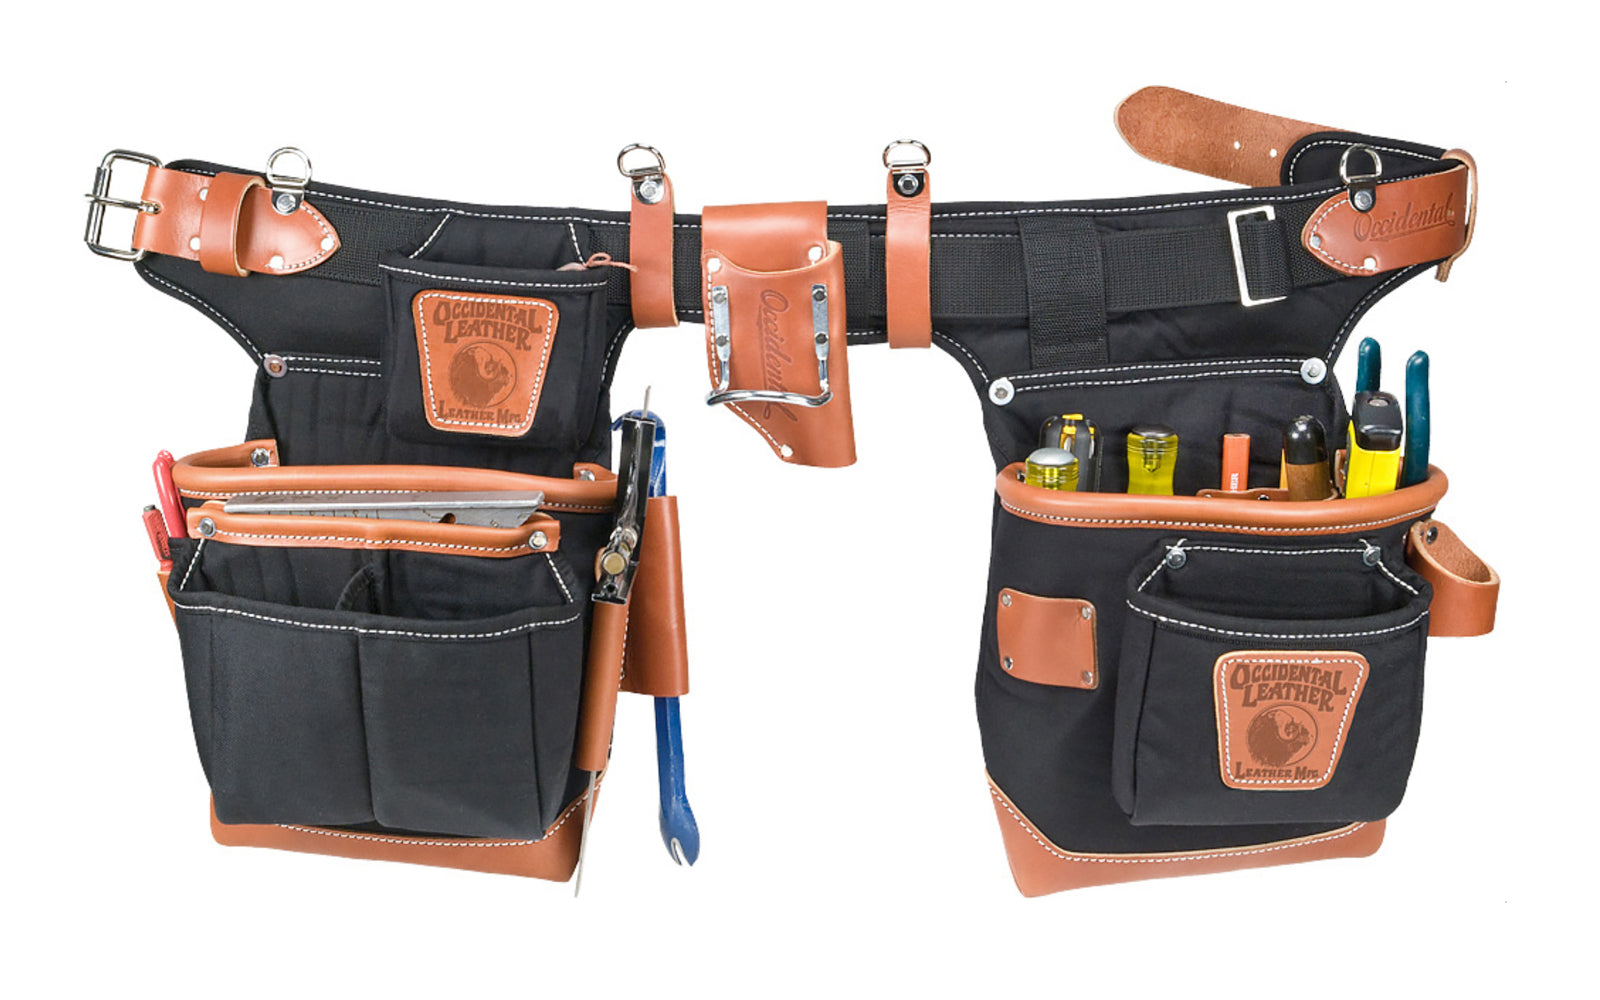 Occidental Leather Heritage "Adjust-To-Fit" FatLip Tool Belt Set - Package Set ~ 9850 - Padded Two Ply Tool Bags Keep Shape - 24 pockets - Fully Adjustable - Contracts to 32” Pant (35” Belt), Expands to 41” Pant (45” Belt). 759244245400. Extremely Abrasion Resistant Industrial Nylon material. Made in USA